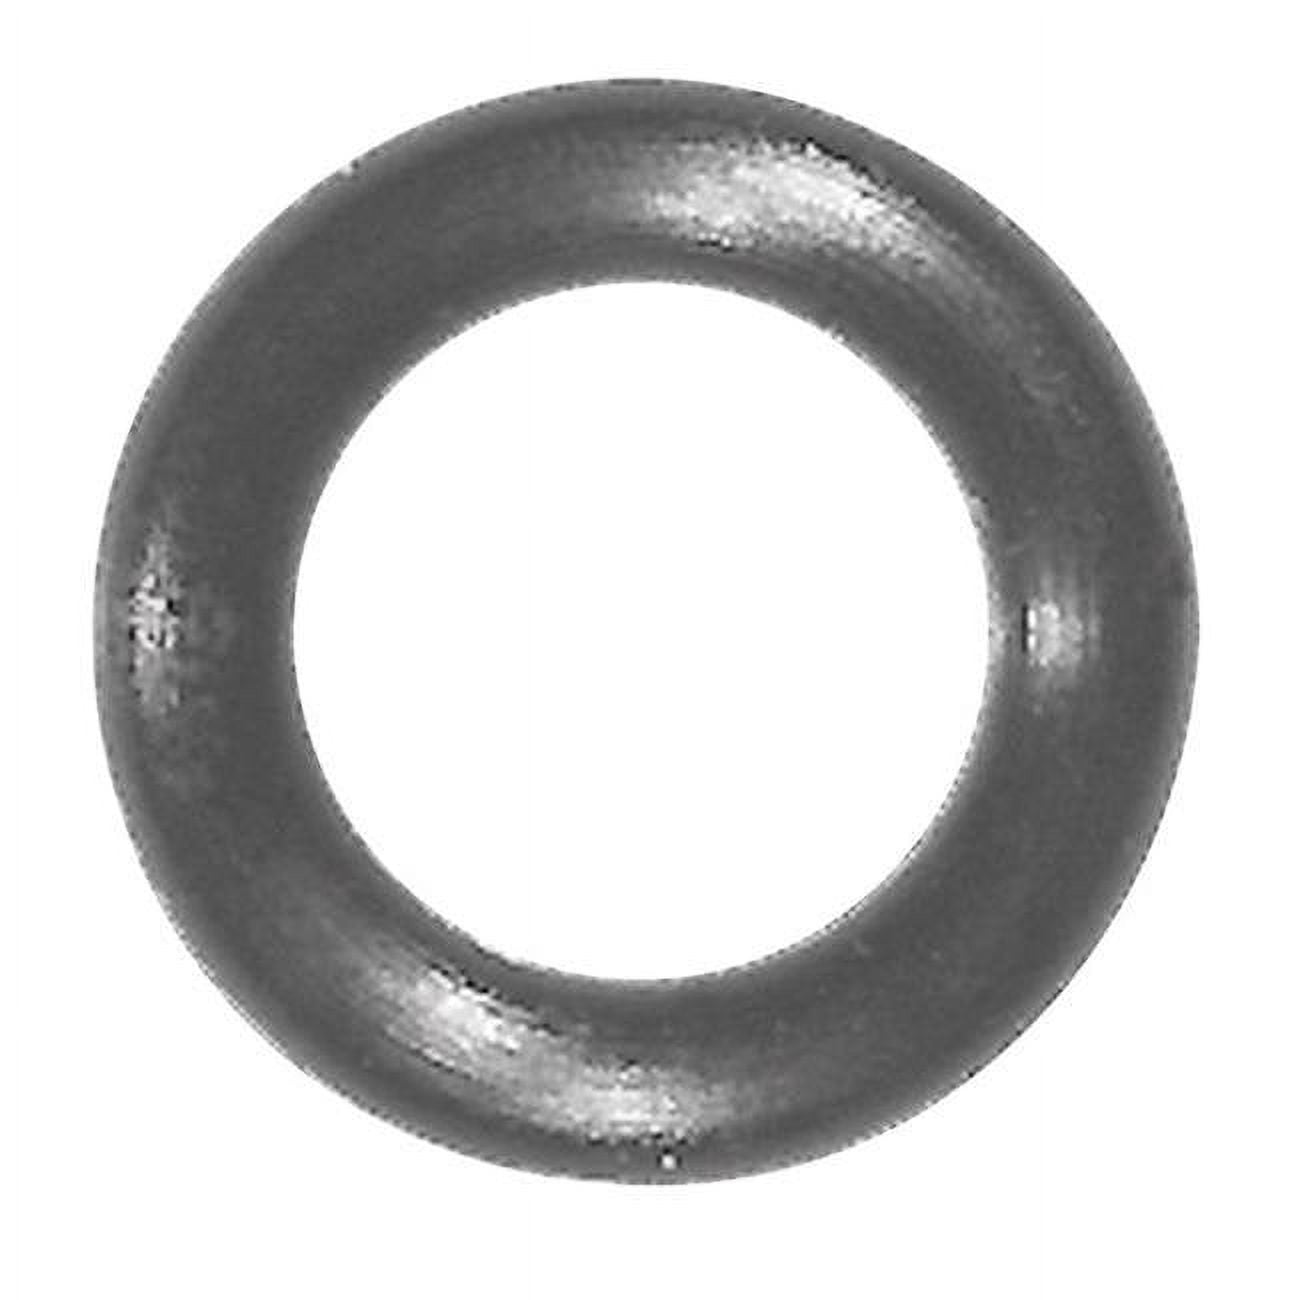 35785b 0.59 X 0.37 X 0.11 In. O-ring Faucet- Pack Of 5